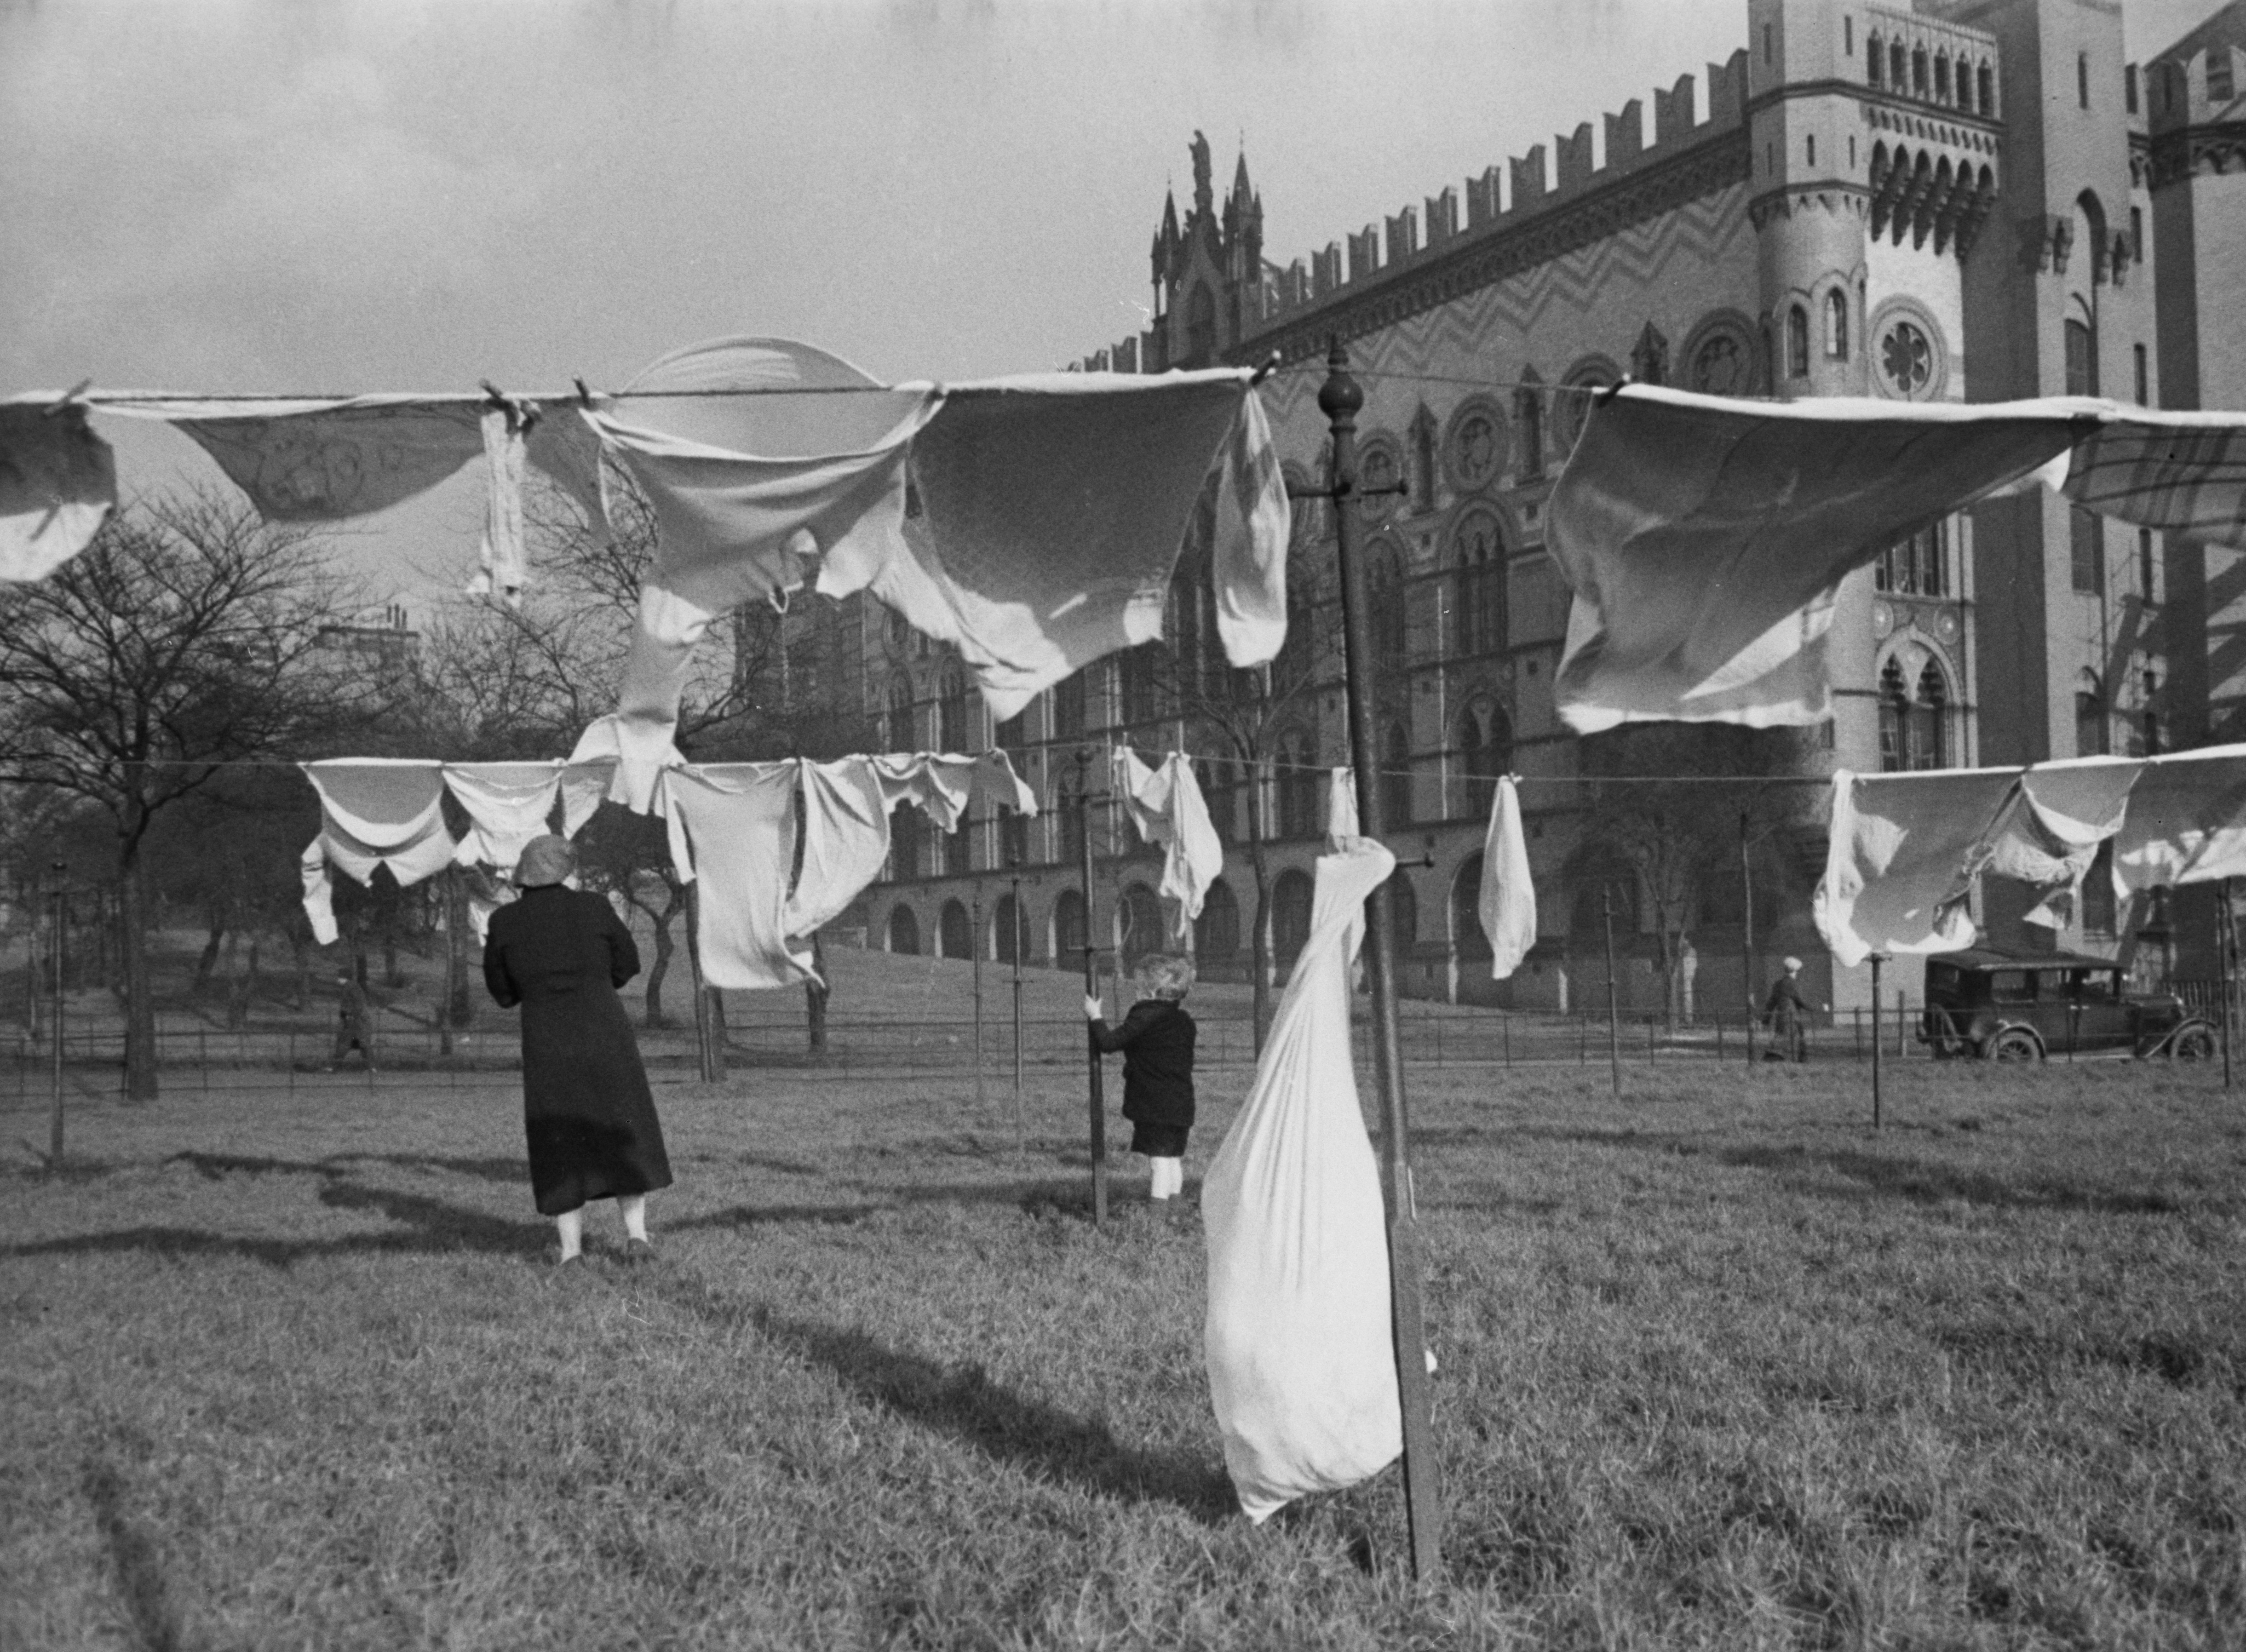 Public clothes lines on Glasgow Green, near the municipal washhouse in Glasgow, Scotland, 1939. Original Publication : Picture Post - 91- Glasgow - pub. 1st April 1939 (Photo by Humphrey Spender/Picture Post/Hulton Archive/Getty Images)